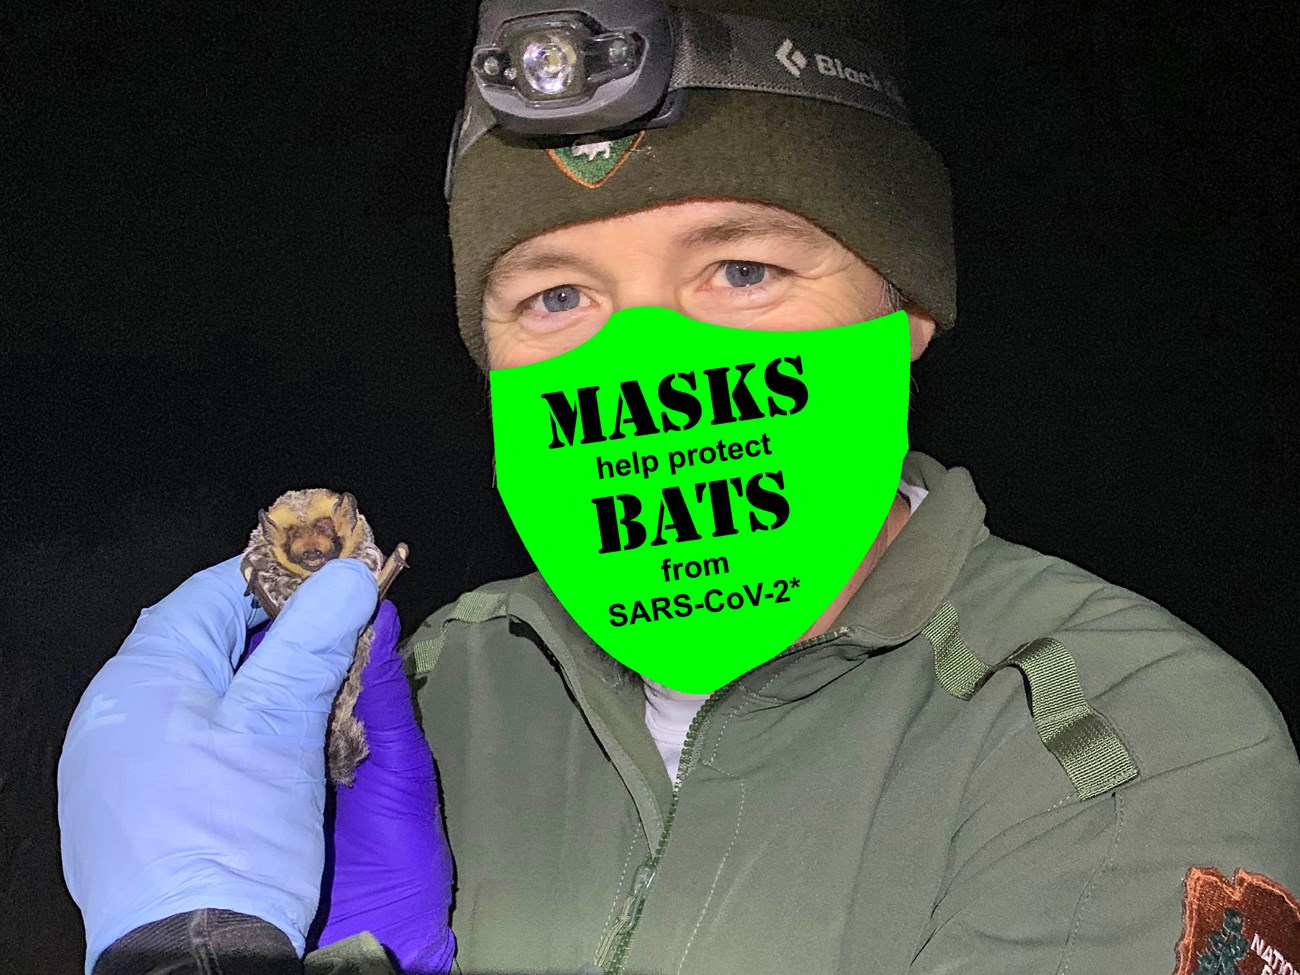 Staff holding a bat captured during mist-netting in gloved hands. An illustrated mask with the text "Masks help protect bats from SARS-CoV-2" is overlaid on his face.